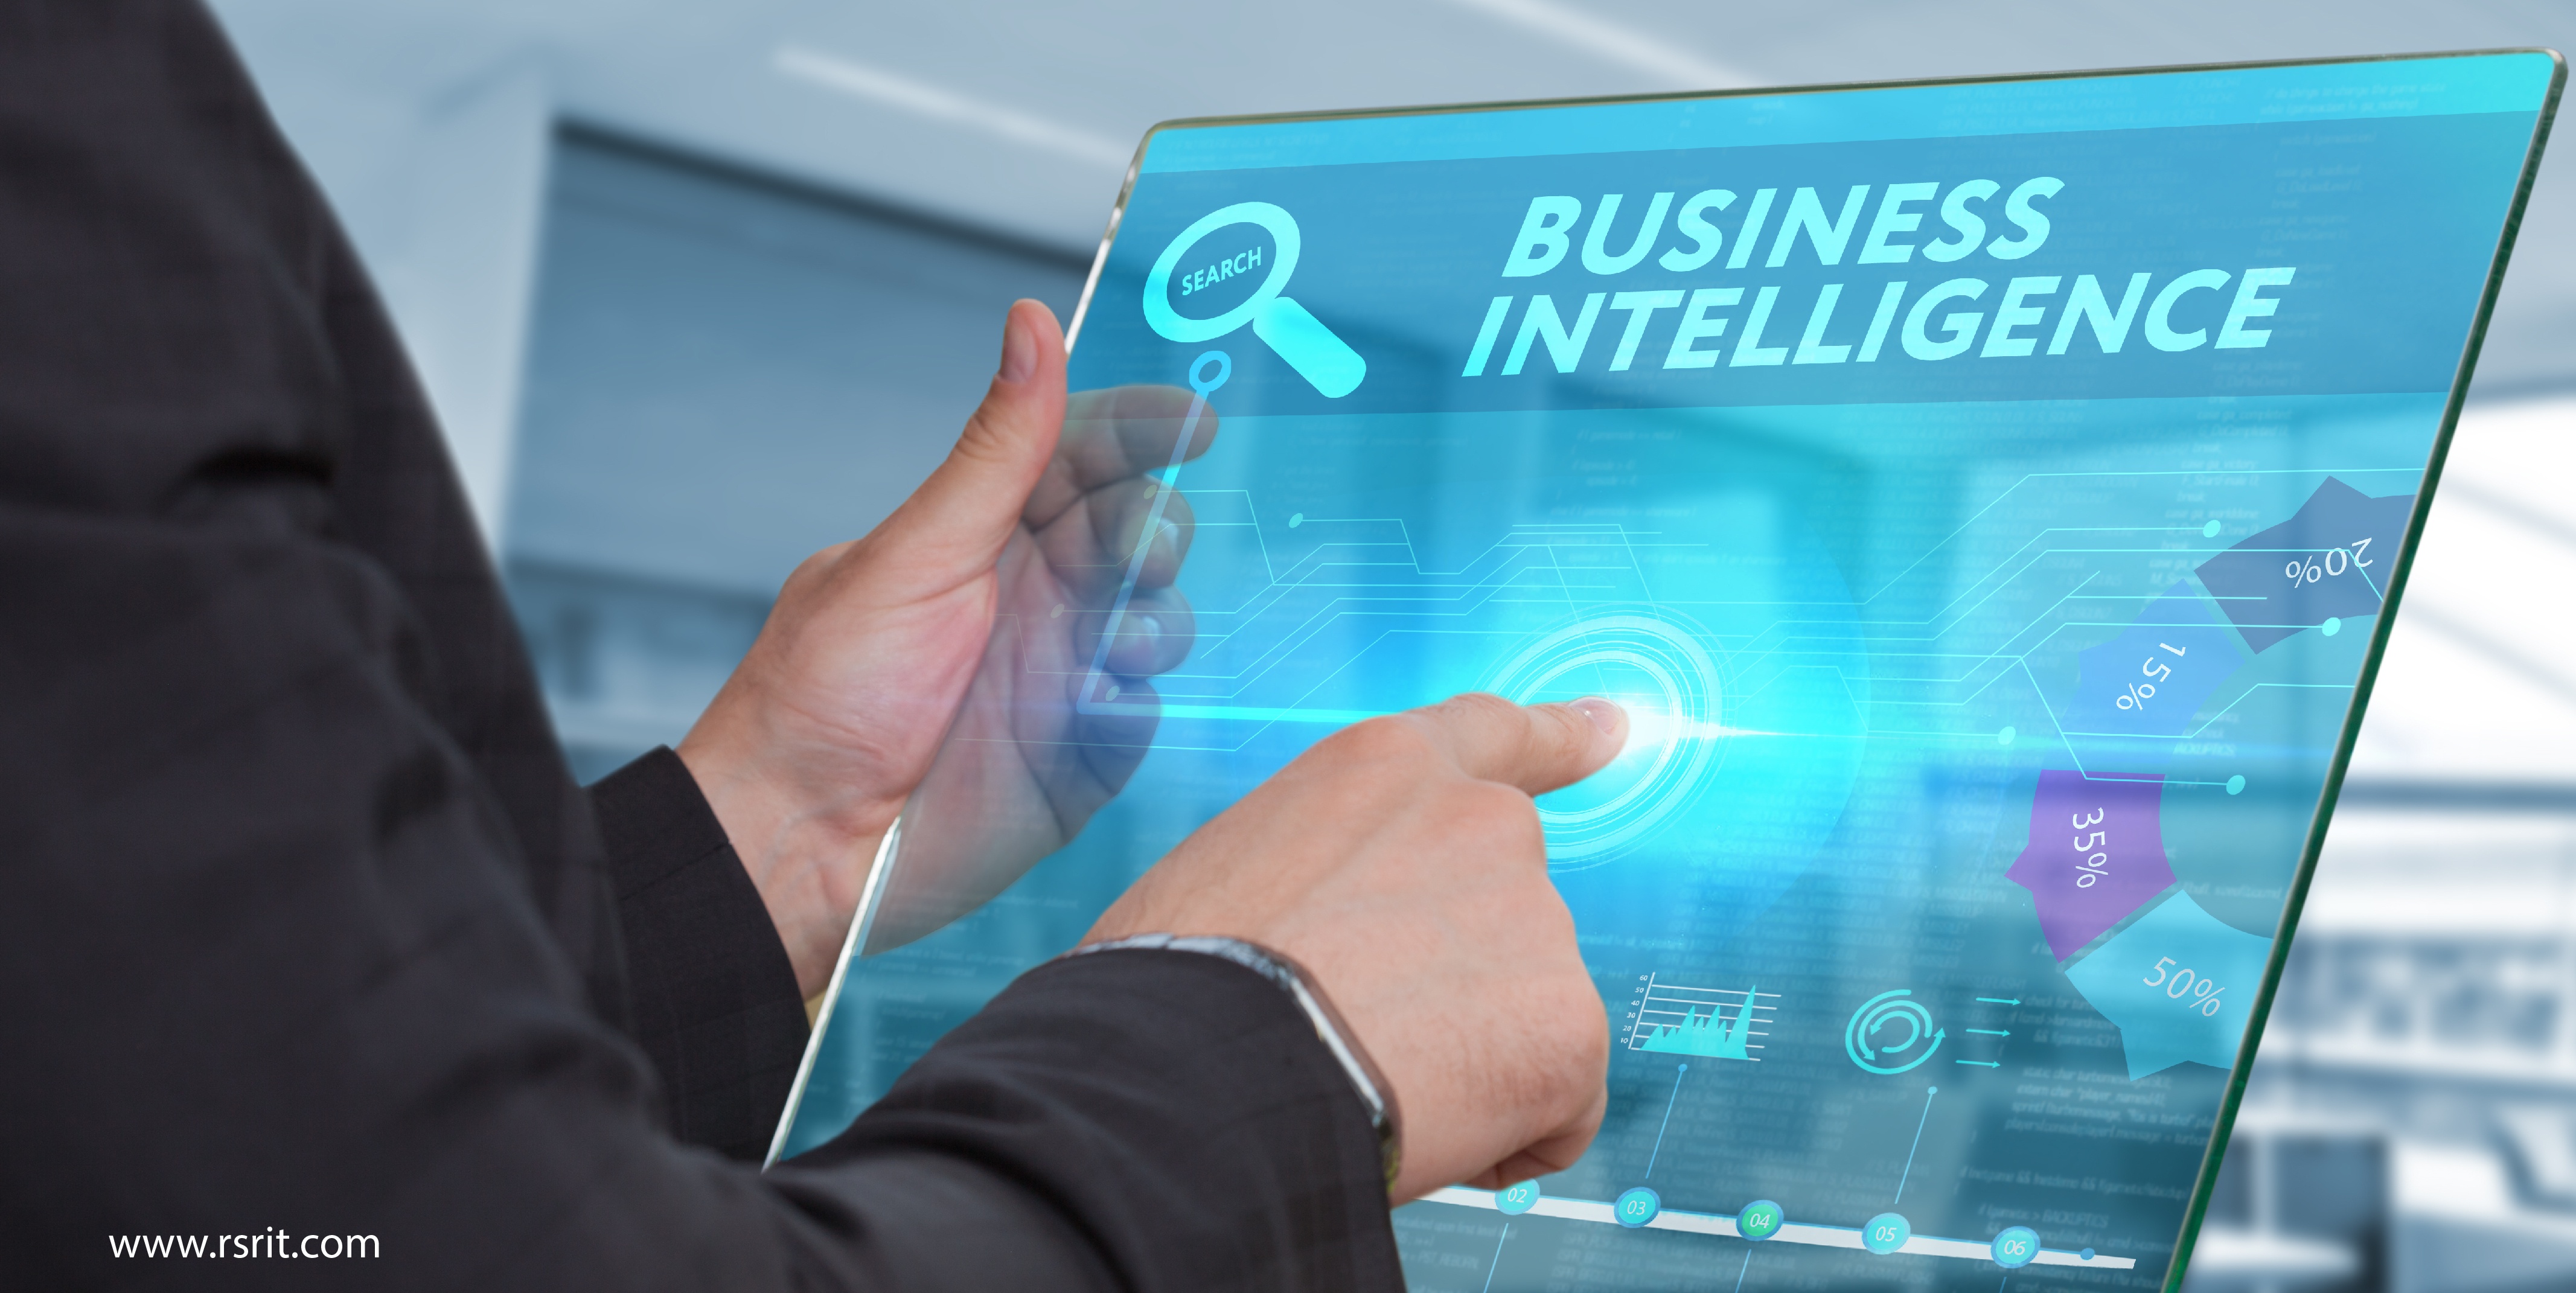 Top business intelligence trends of 2017